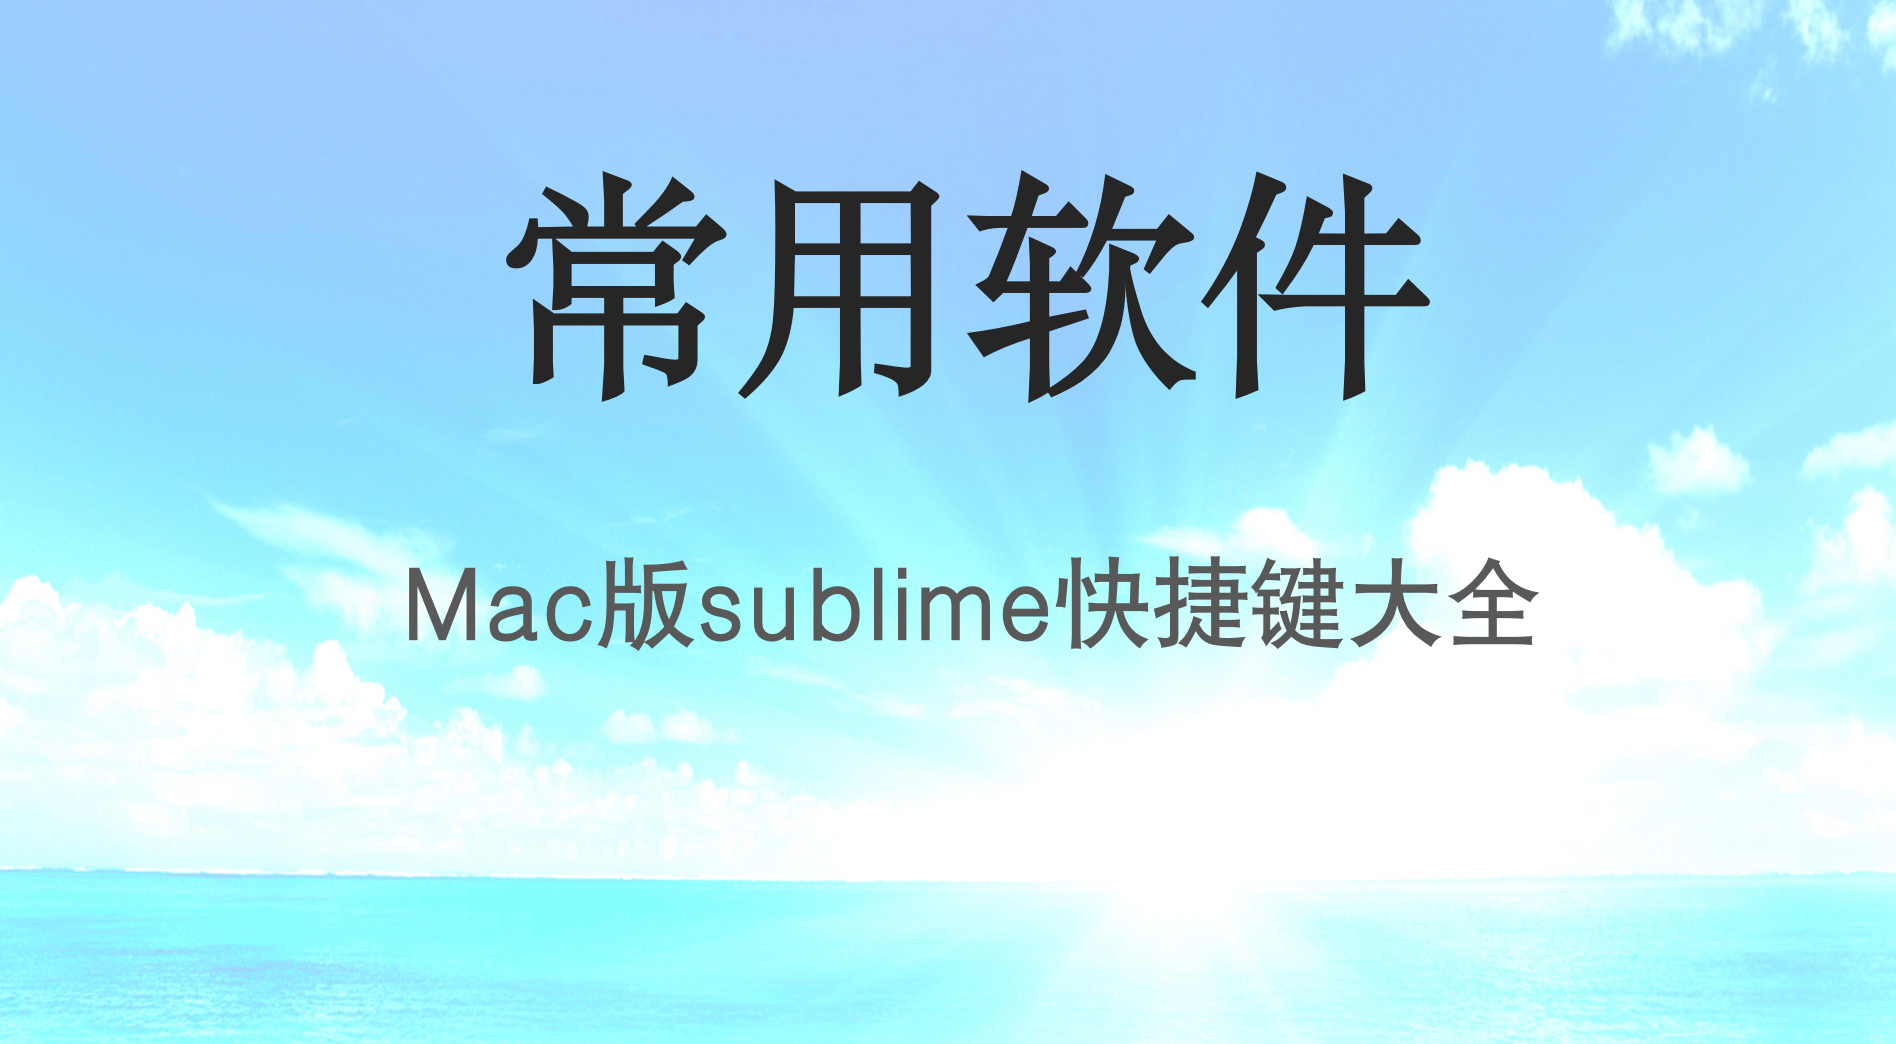 <span style='color:red;'>Mac</span><span style='color:red;'>版</span>sublime<span style='color:red;'>快捷键</span><span style='color:red;'>大全</span>